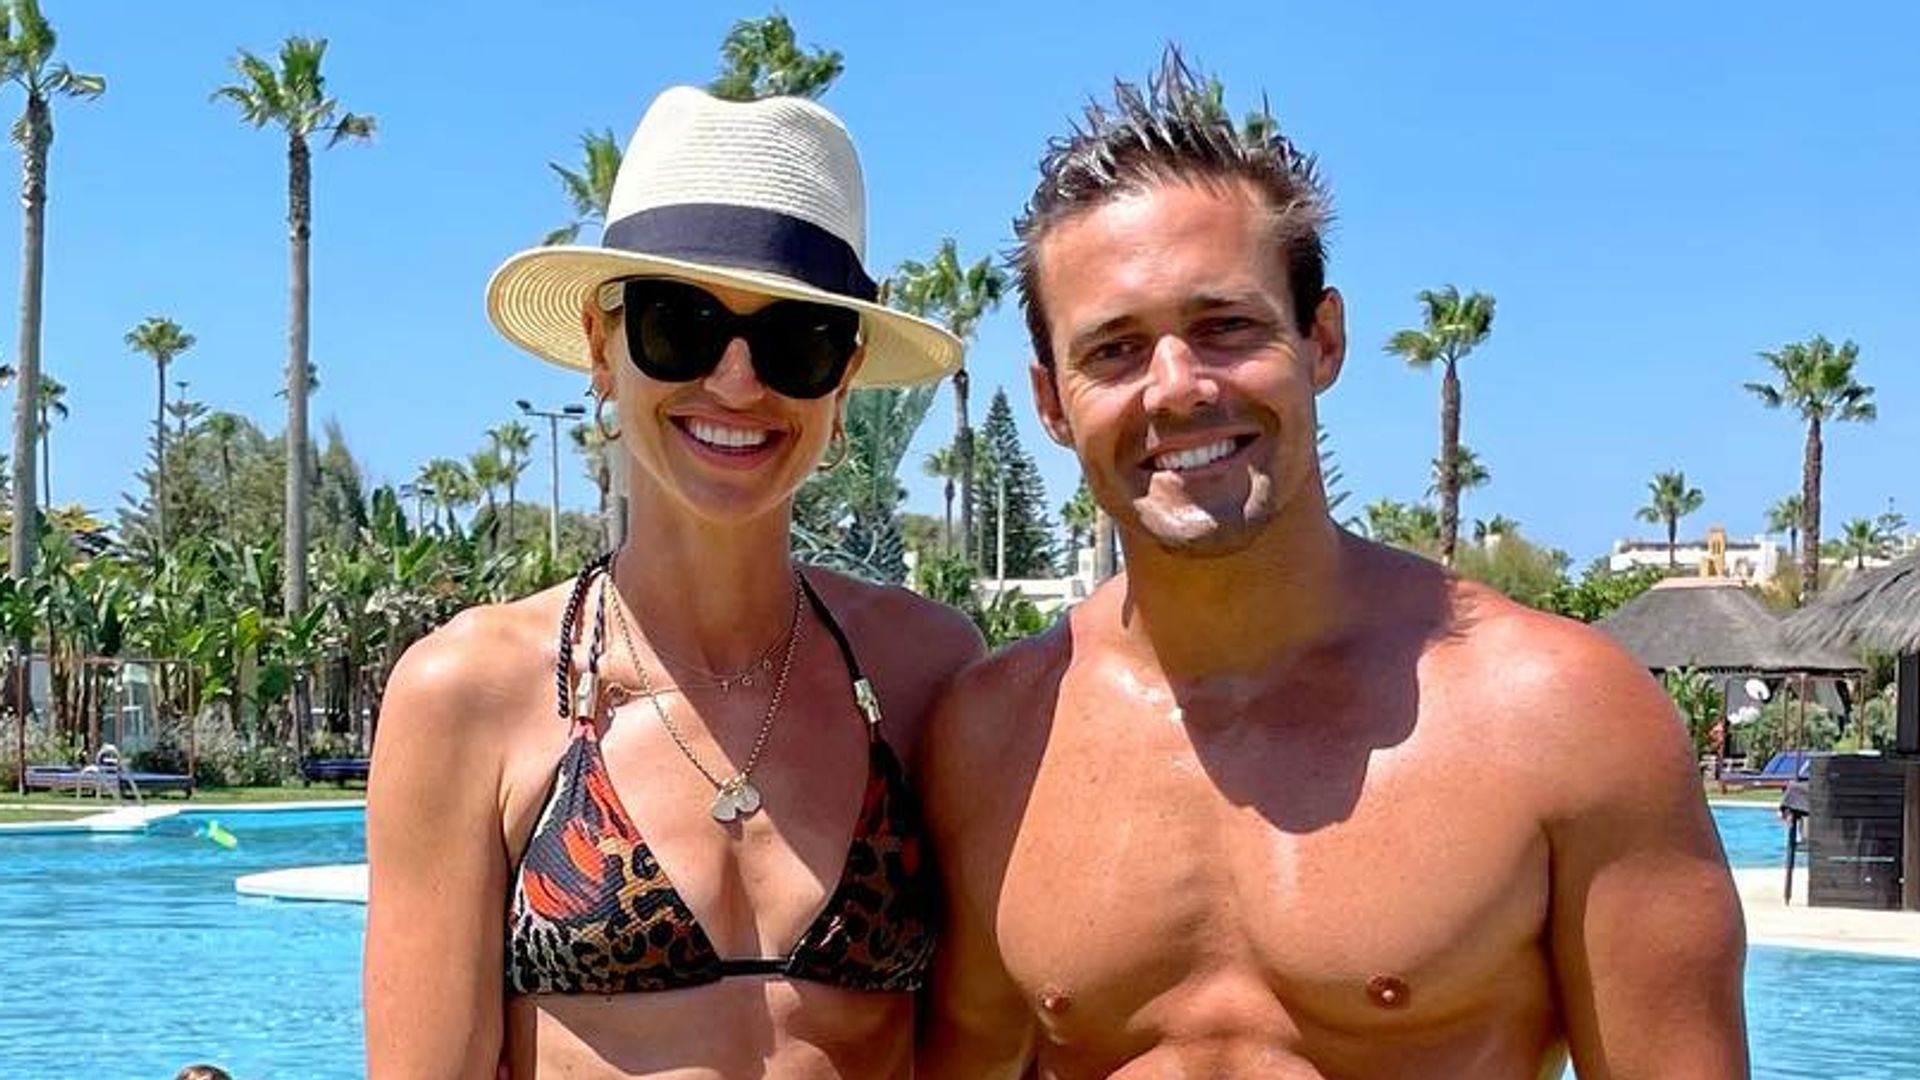 Spencer Matthews abs in swimming trunks and Vogue Williams looking fit in bikini